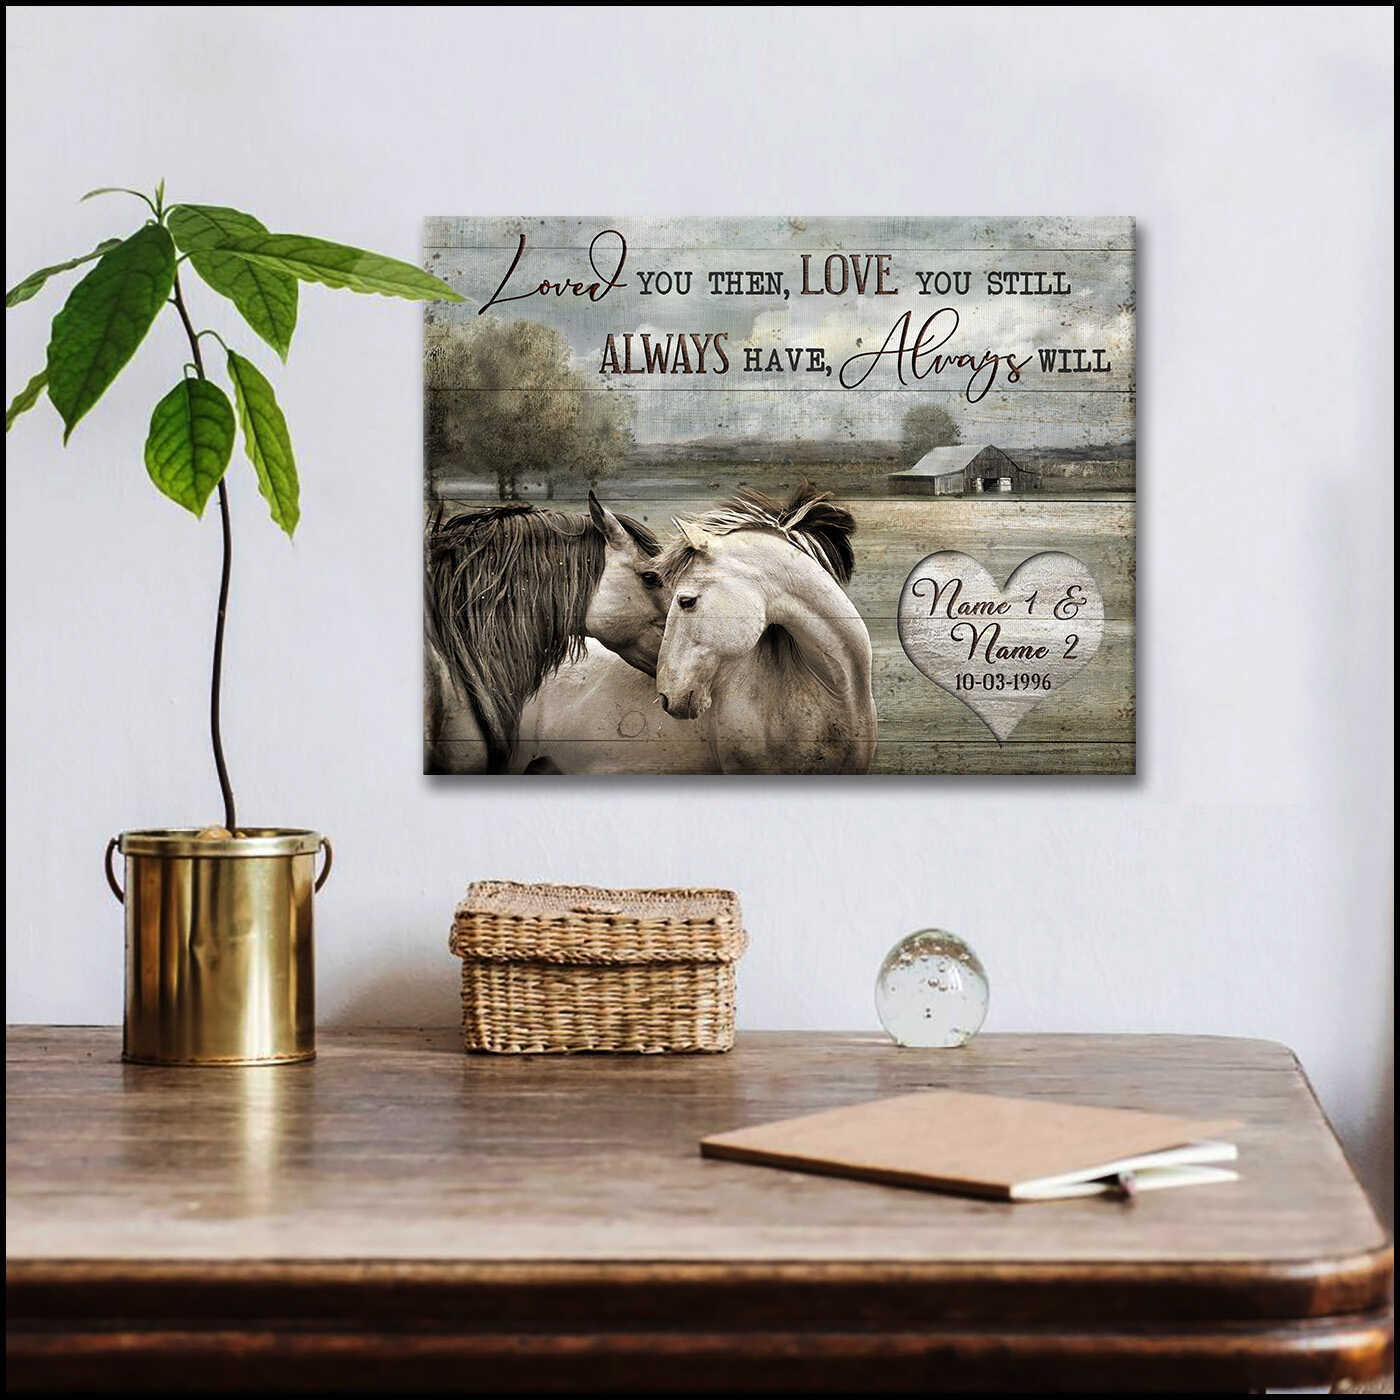 Farm With Couple Of Horses On Rustic Wood Loved You Then Love You Still Always Have Always Will Farm Farmhouse Custom Name And Date Canvas Prints Wall Art Decor